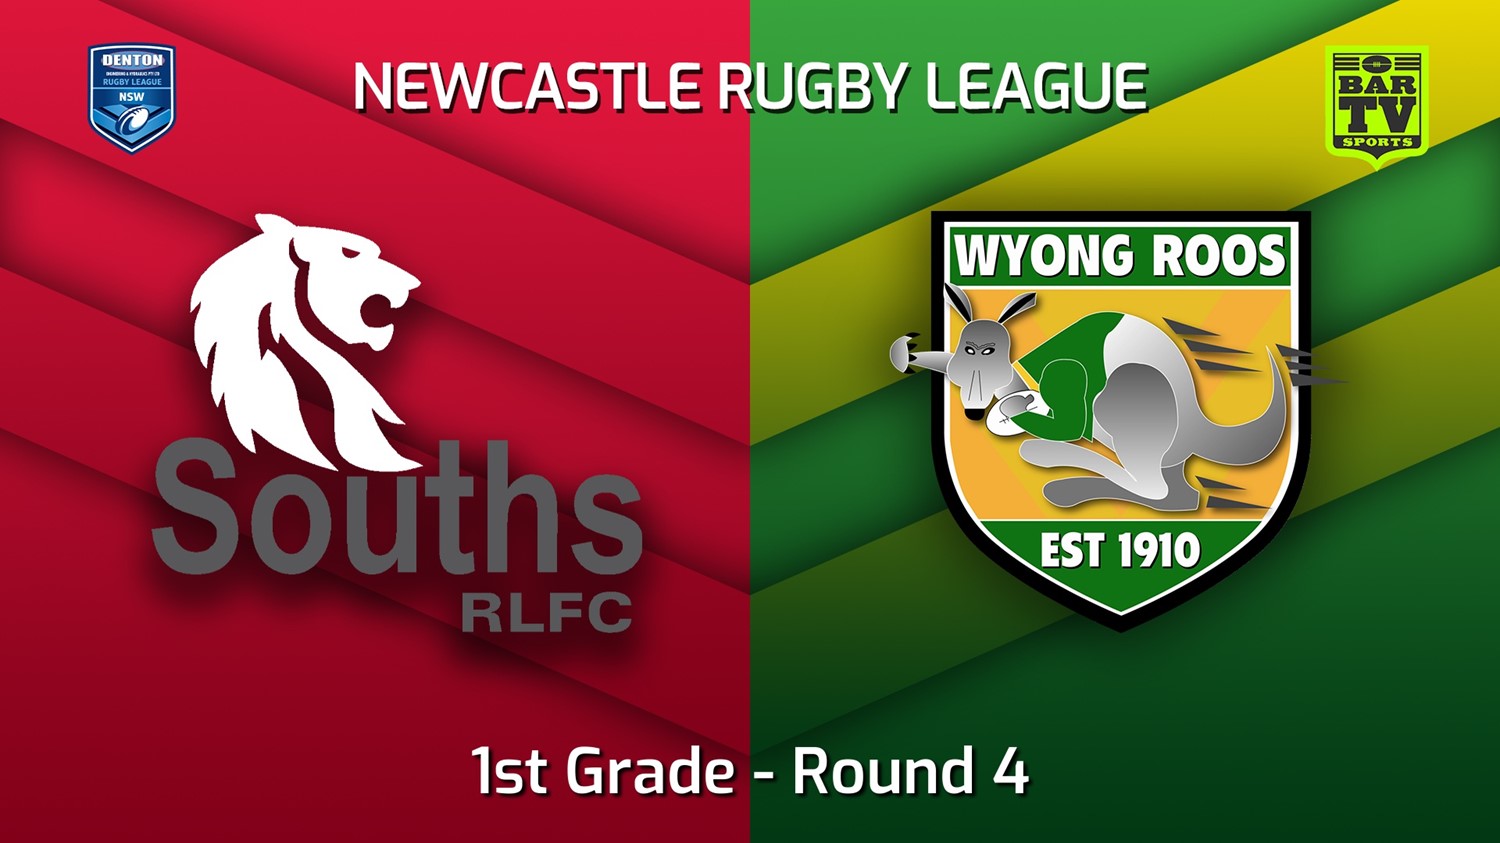 220415-Newcastle Round 4 - 1st Grade - South Newcastle Lions v Wyong Roos Slate Image